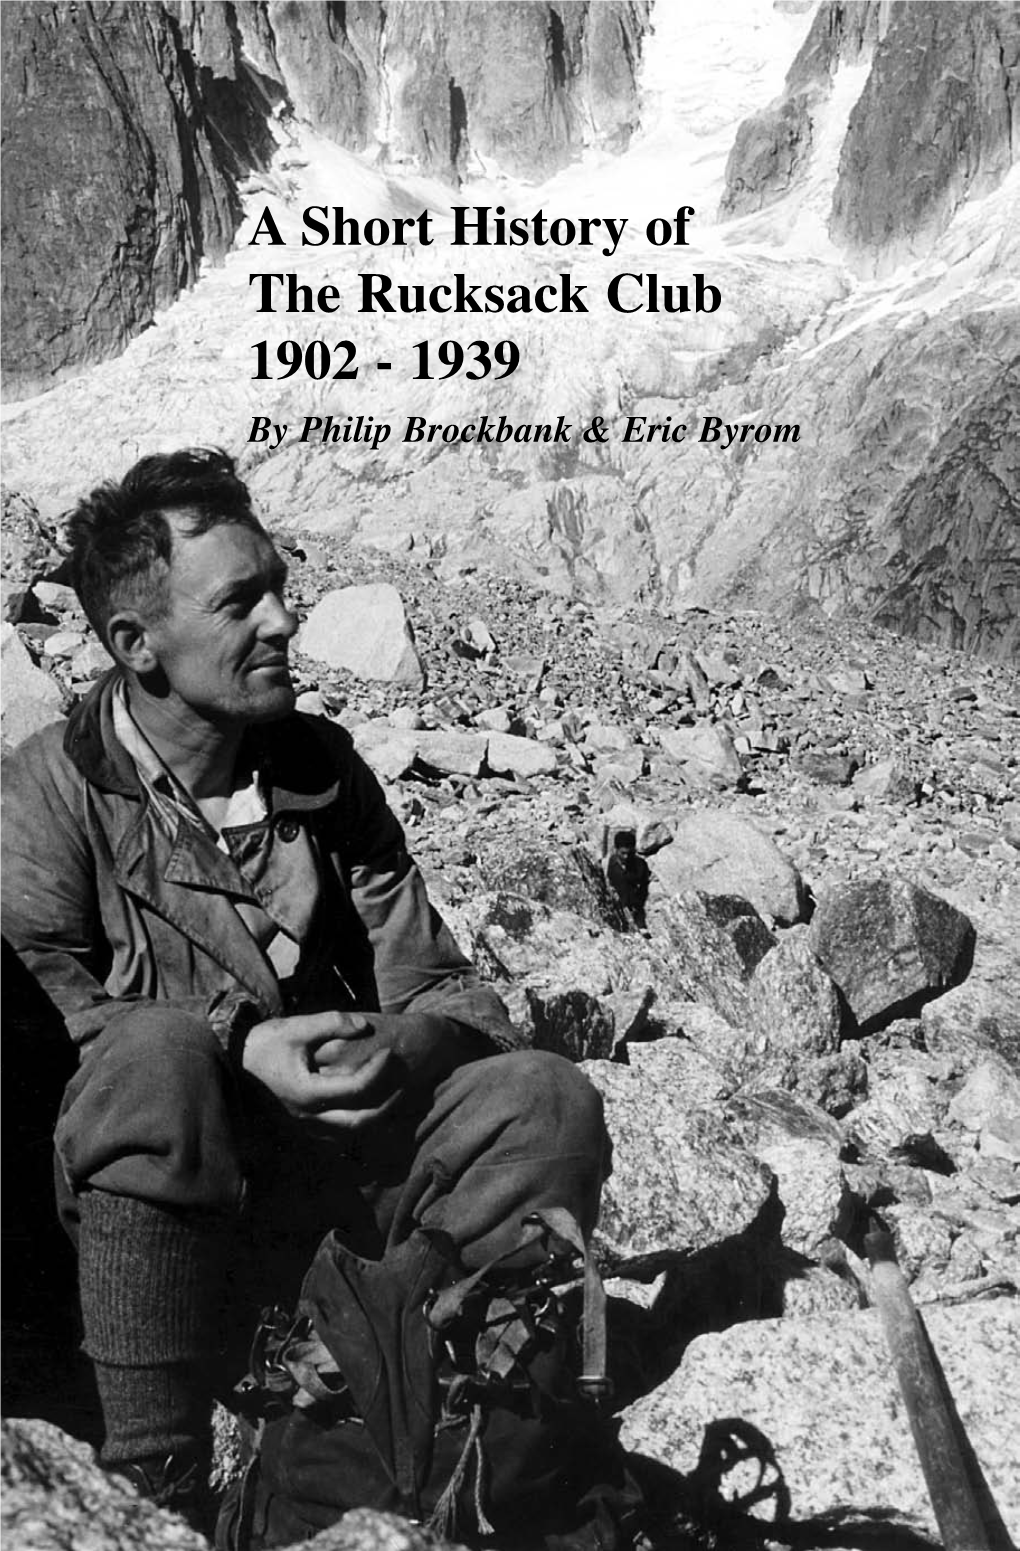 A Short History of the Rucksack Club 1902 - 1939 a Reprinting of the Works of Byrom and Brockbank Prepared by Roger Booth, Mike Dent and John Payne